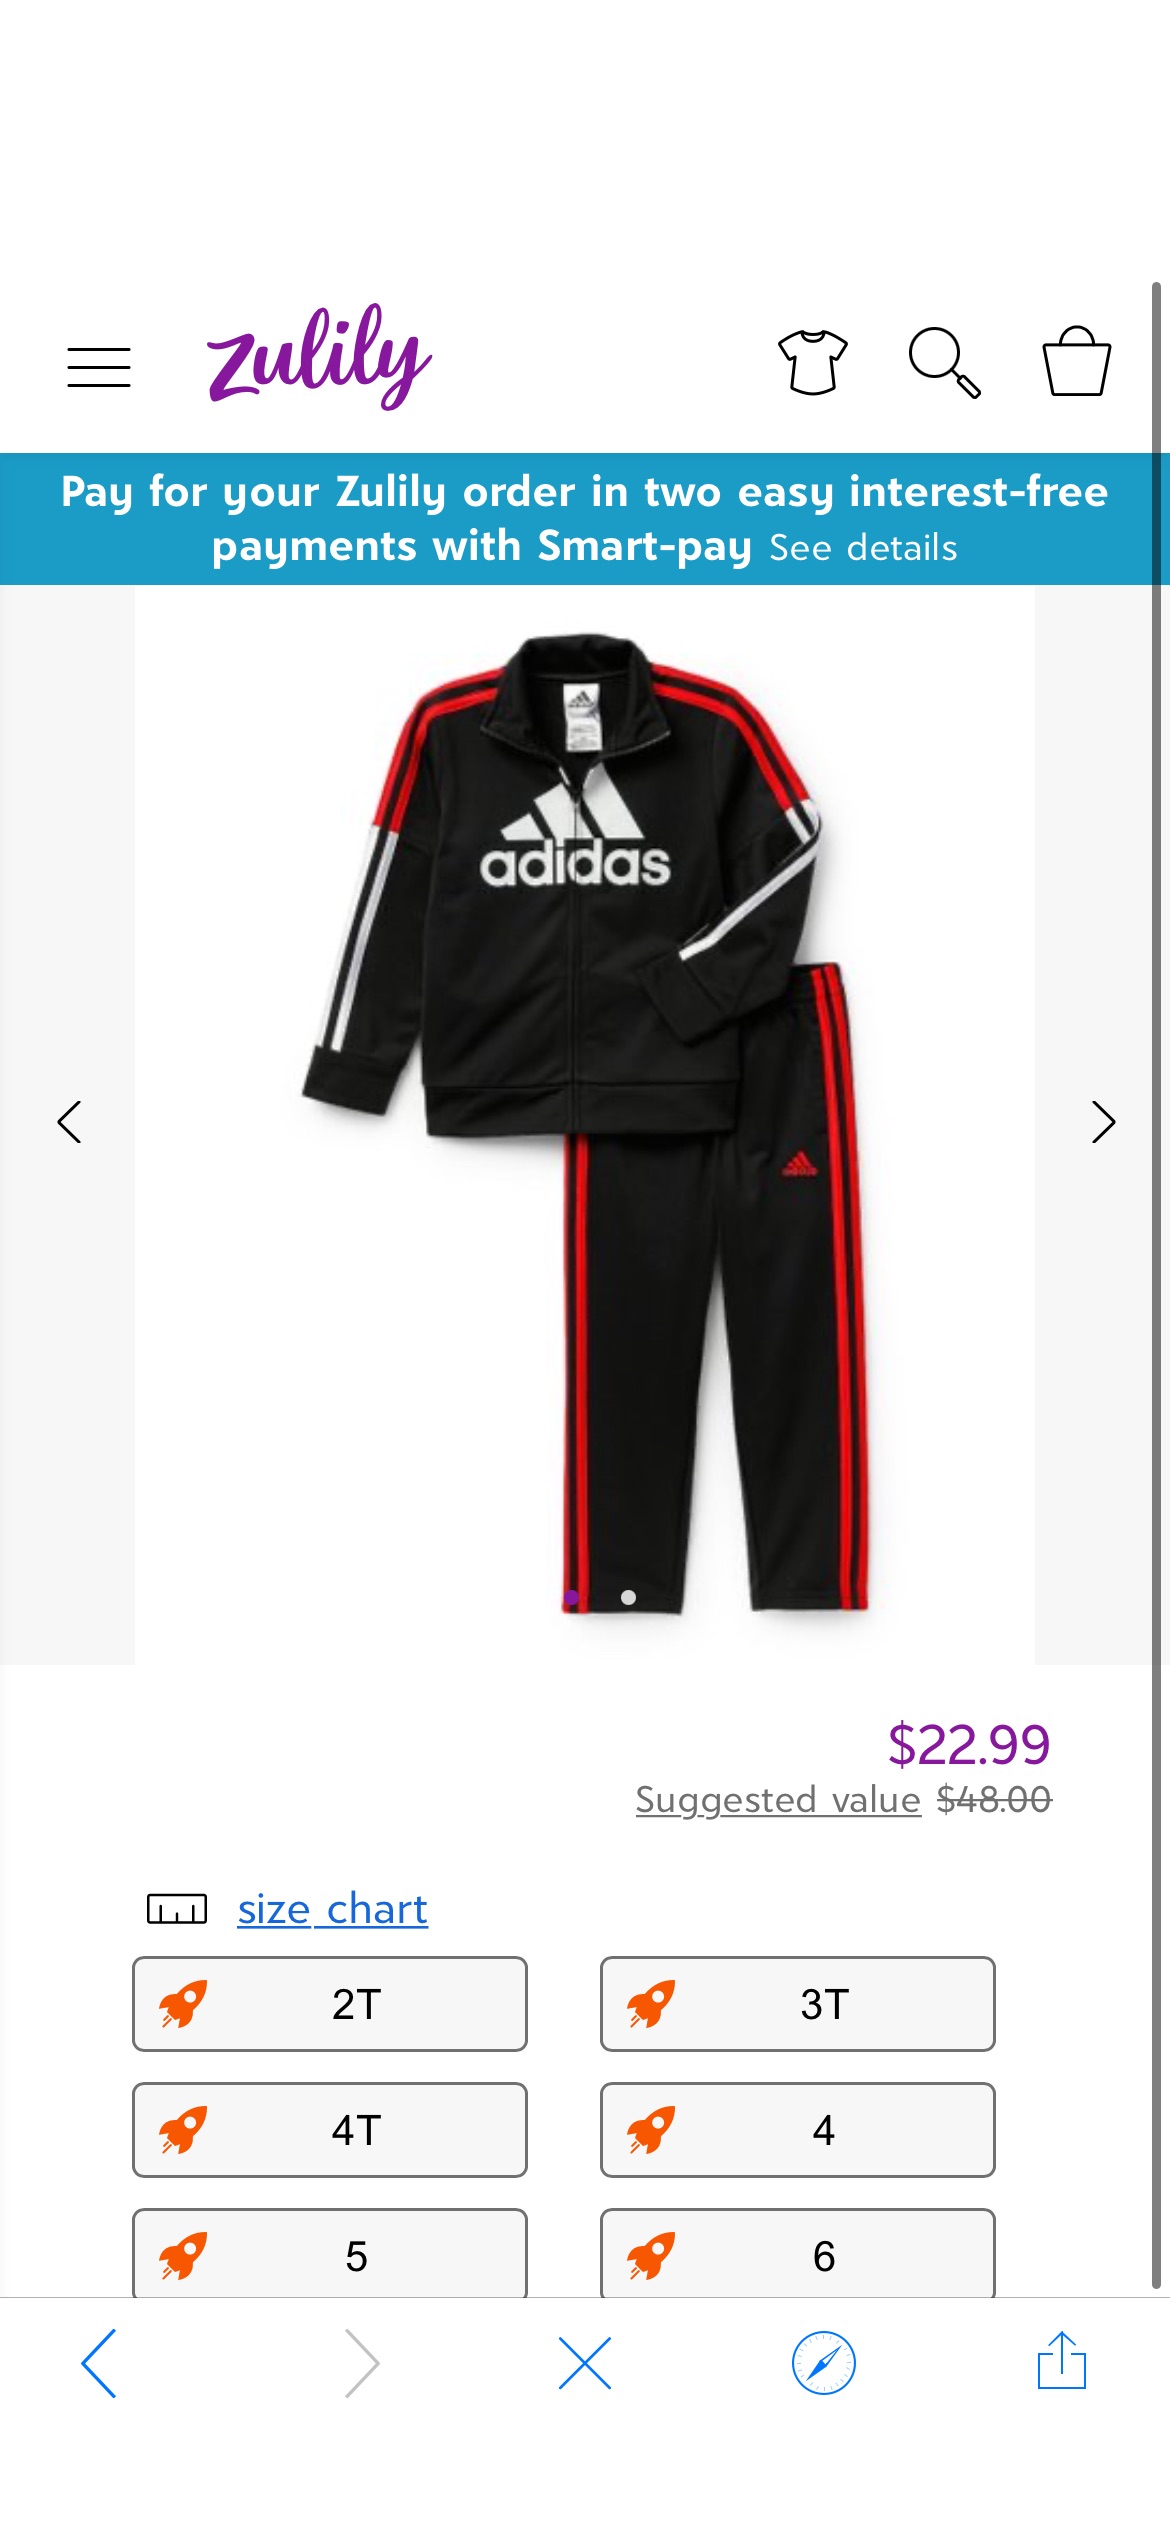 adidas Black & Red Classic Track Jacket & Pants - Toddler & Boys | Best Price and Reviews | Zulily